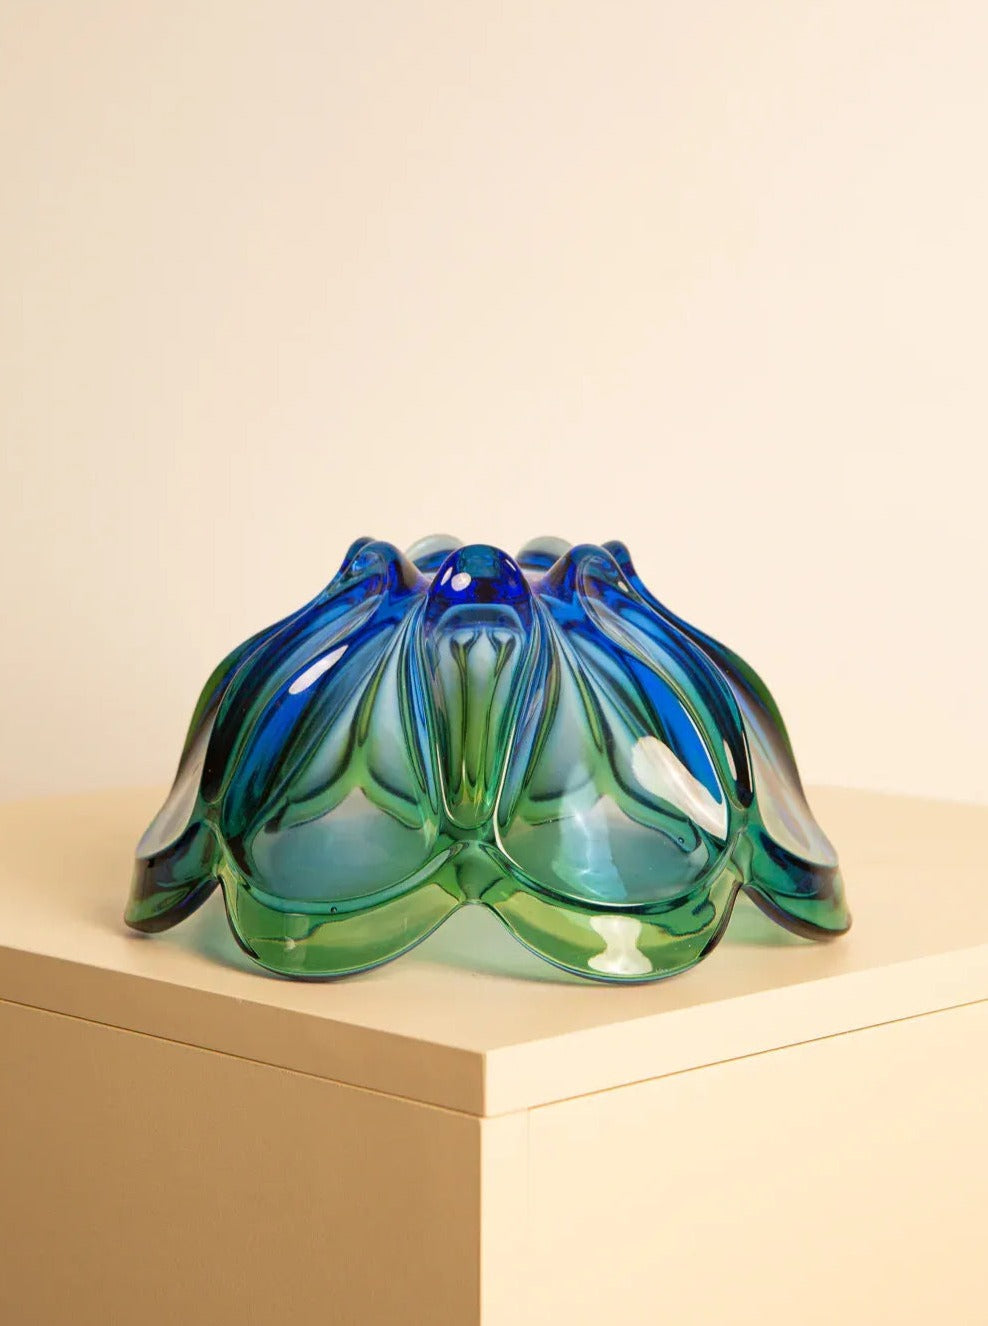 A vibrant, decorative Treaptyque Large vide-poches "Flower" in 60's Murano glass featuring blue and green hues, with an organic, petal-like design. It is displayed on a light-colored rectangular pedestal against a plain, beige background, exemplifying exquisite Italian craftsmanship.